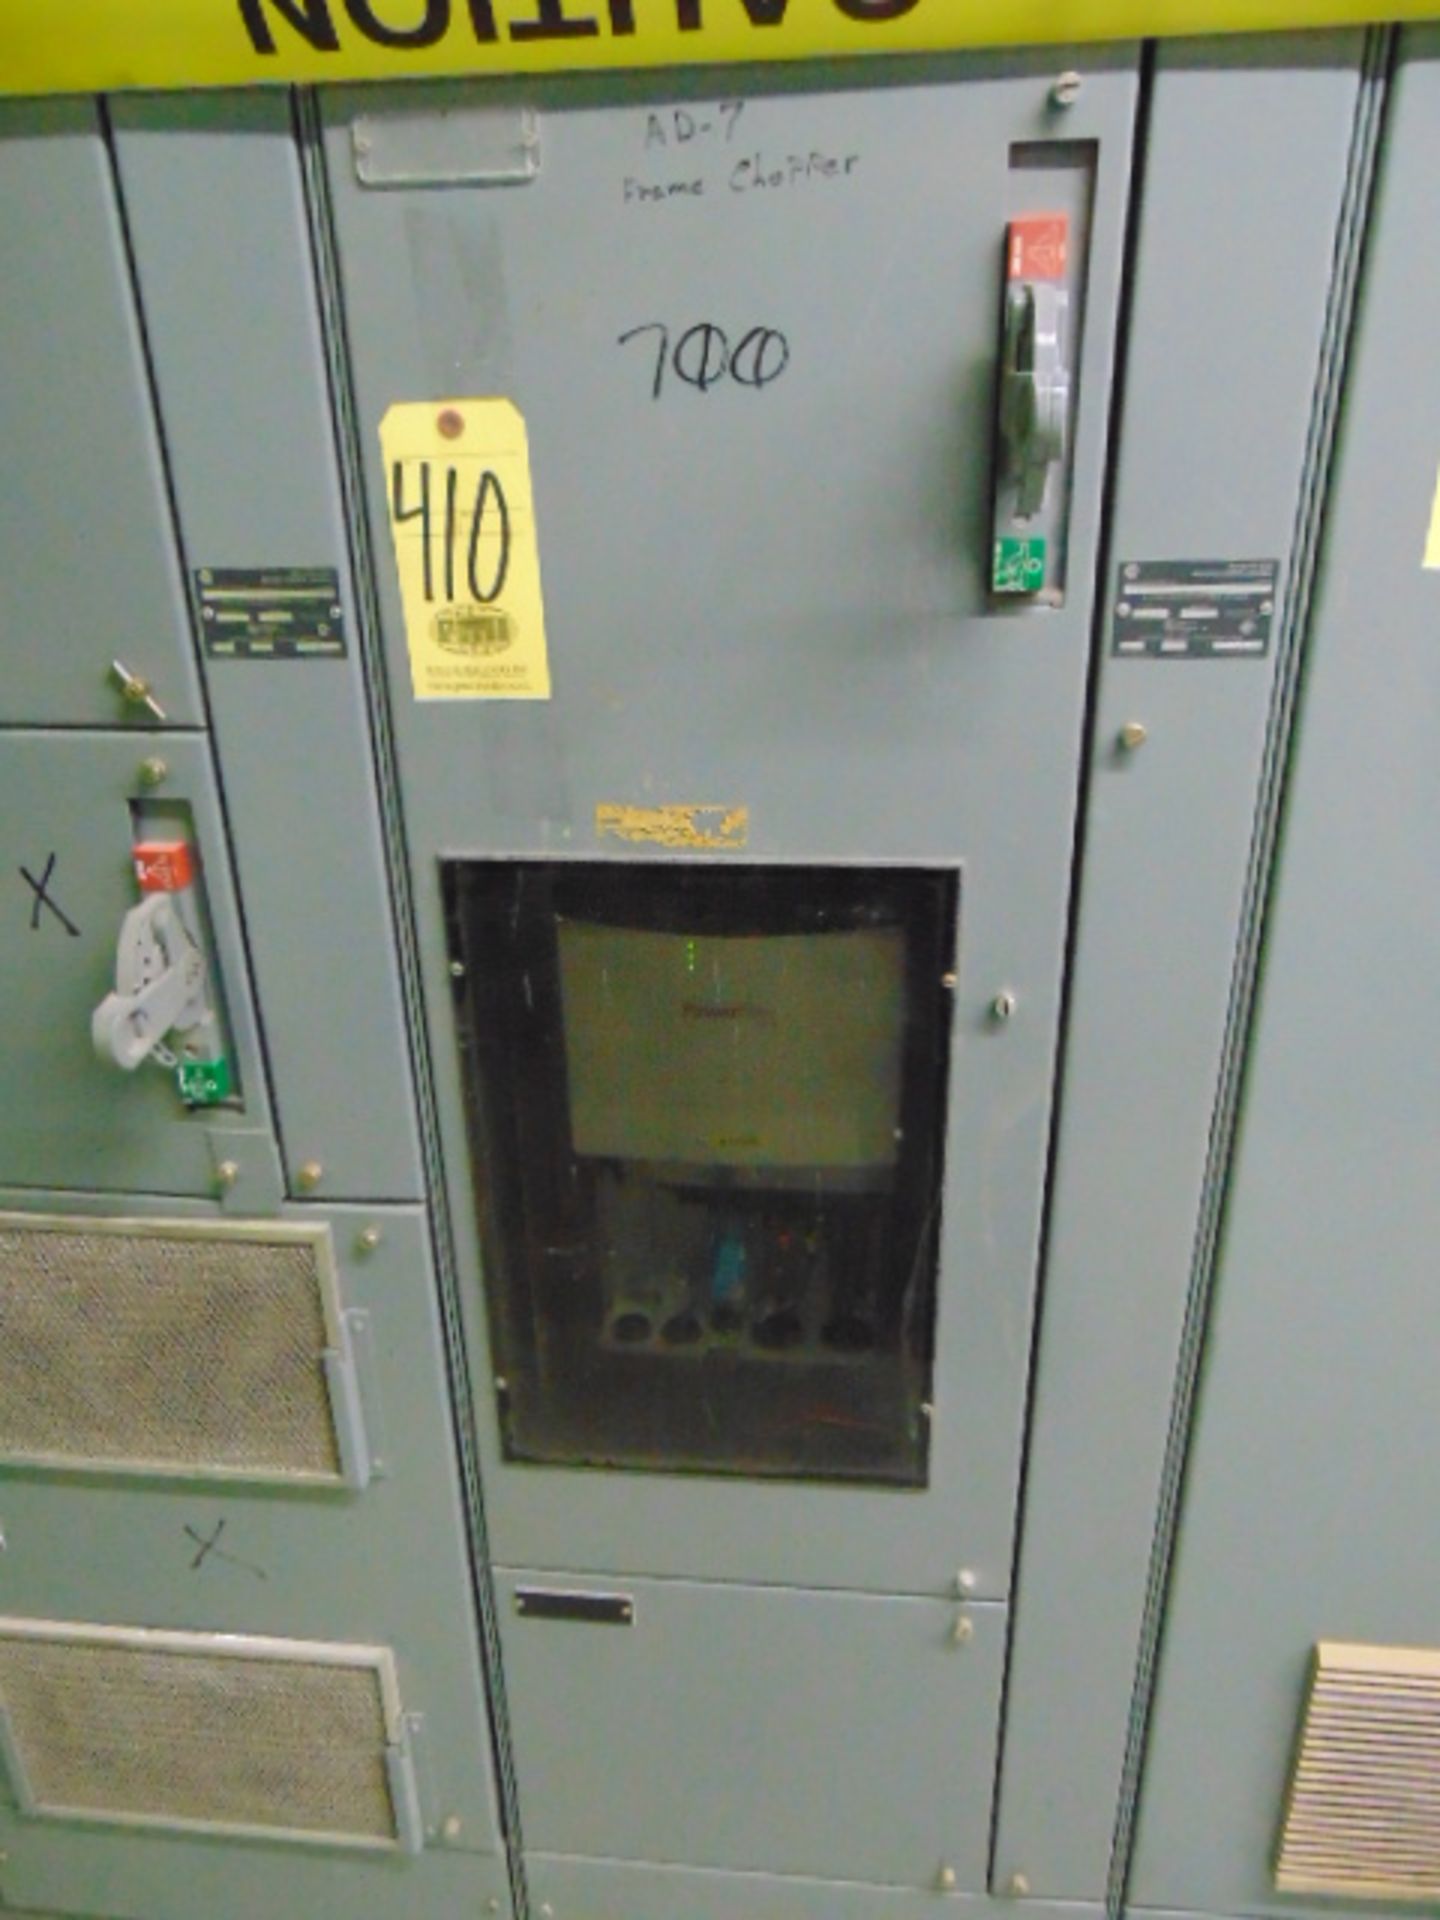 AC VARIABLE FREQUENCY DRIVE, ALLEN BRADLEY POWERFLEX MDL. 700 (Note: has been disconnected by